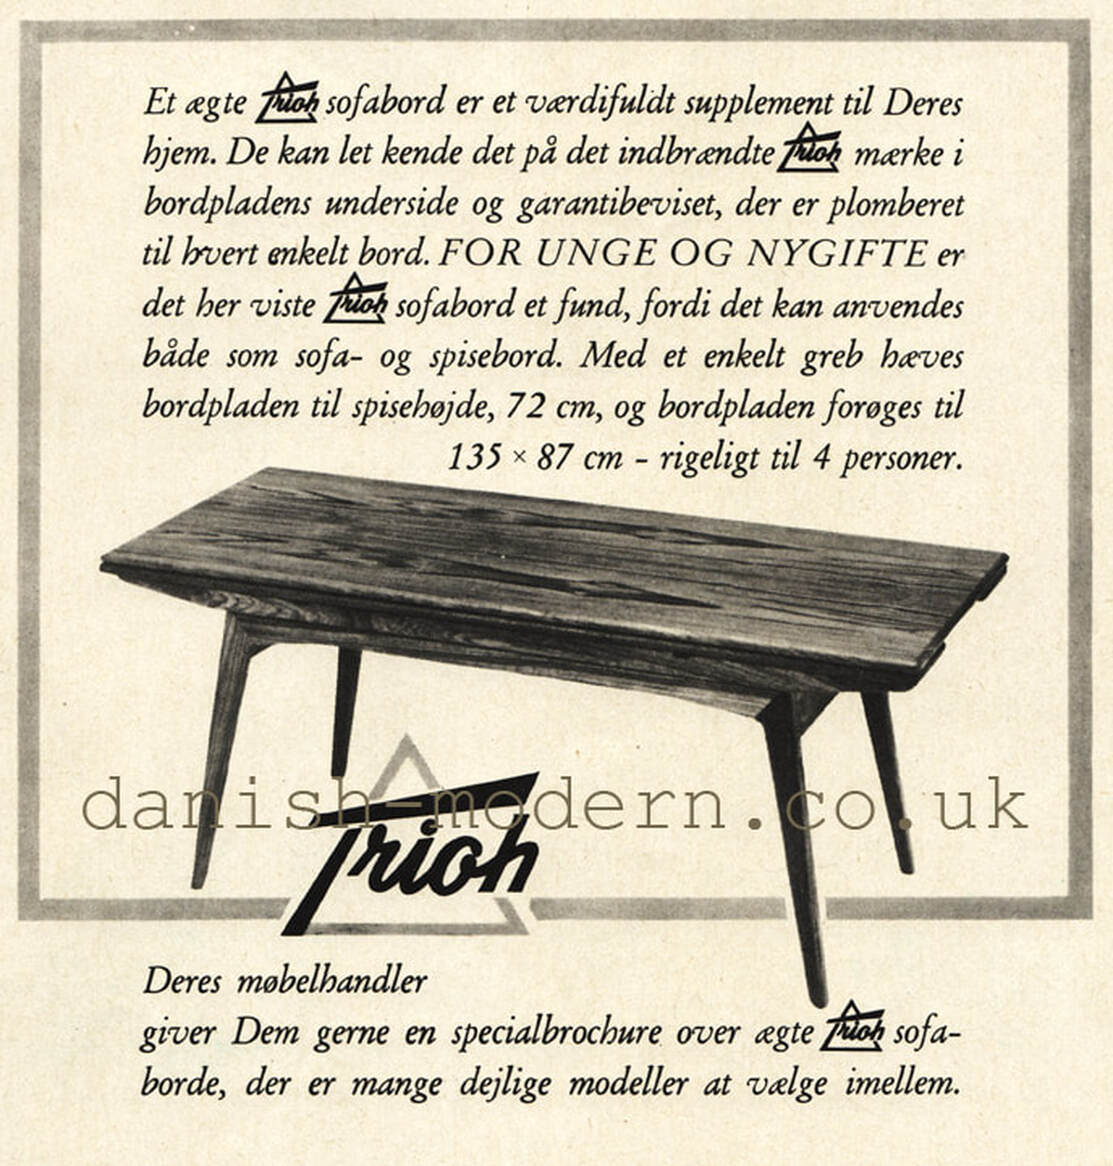 Black and white print ad from 1962 promoting the Elevator table designed by Kai Kristiansen for Trioh, Denmark.